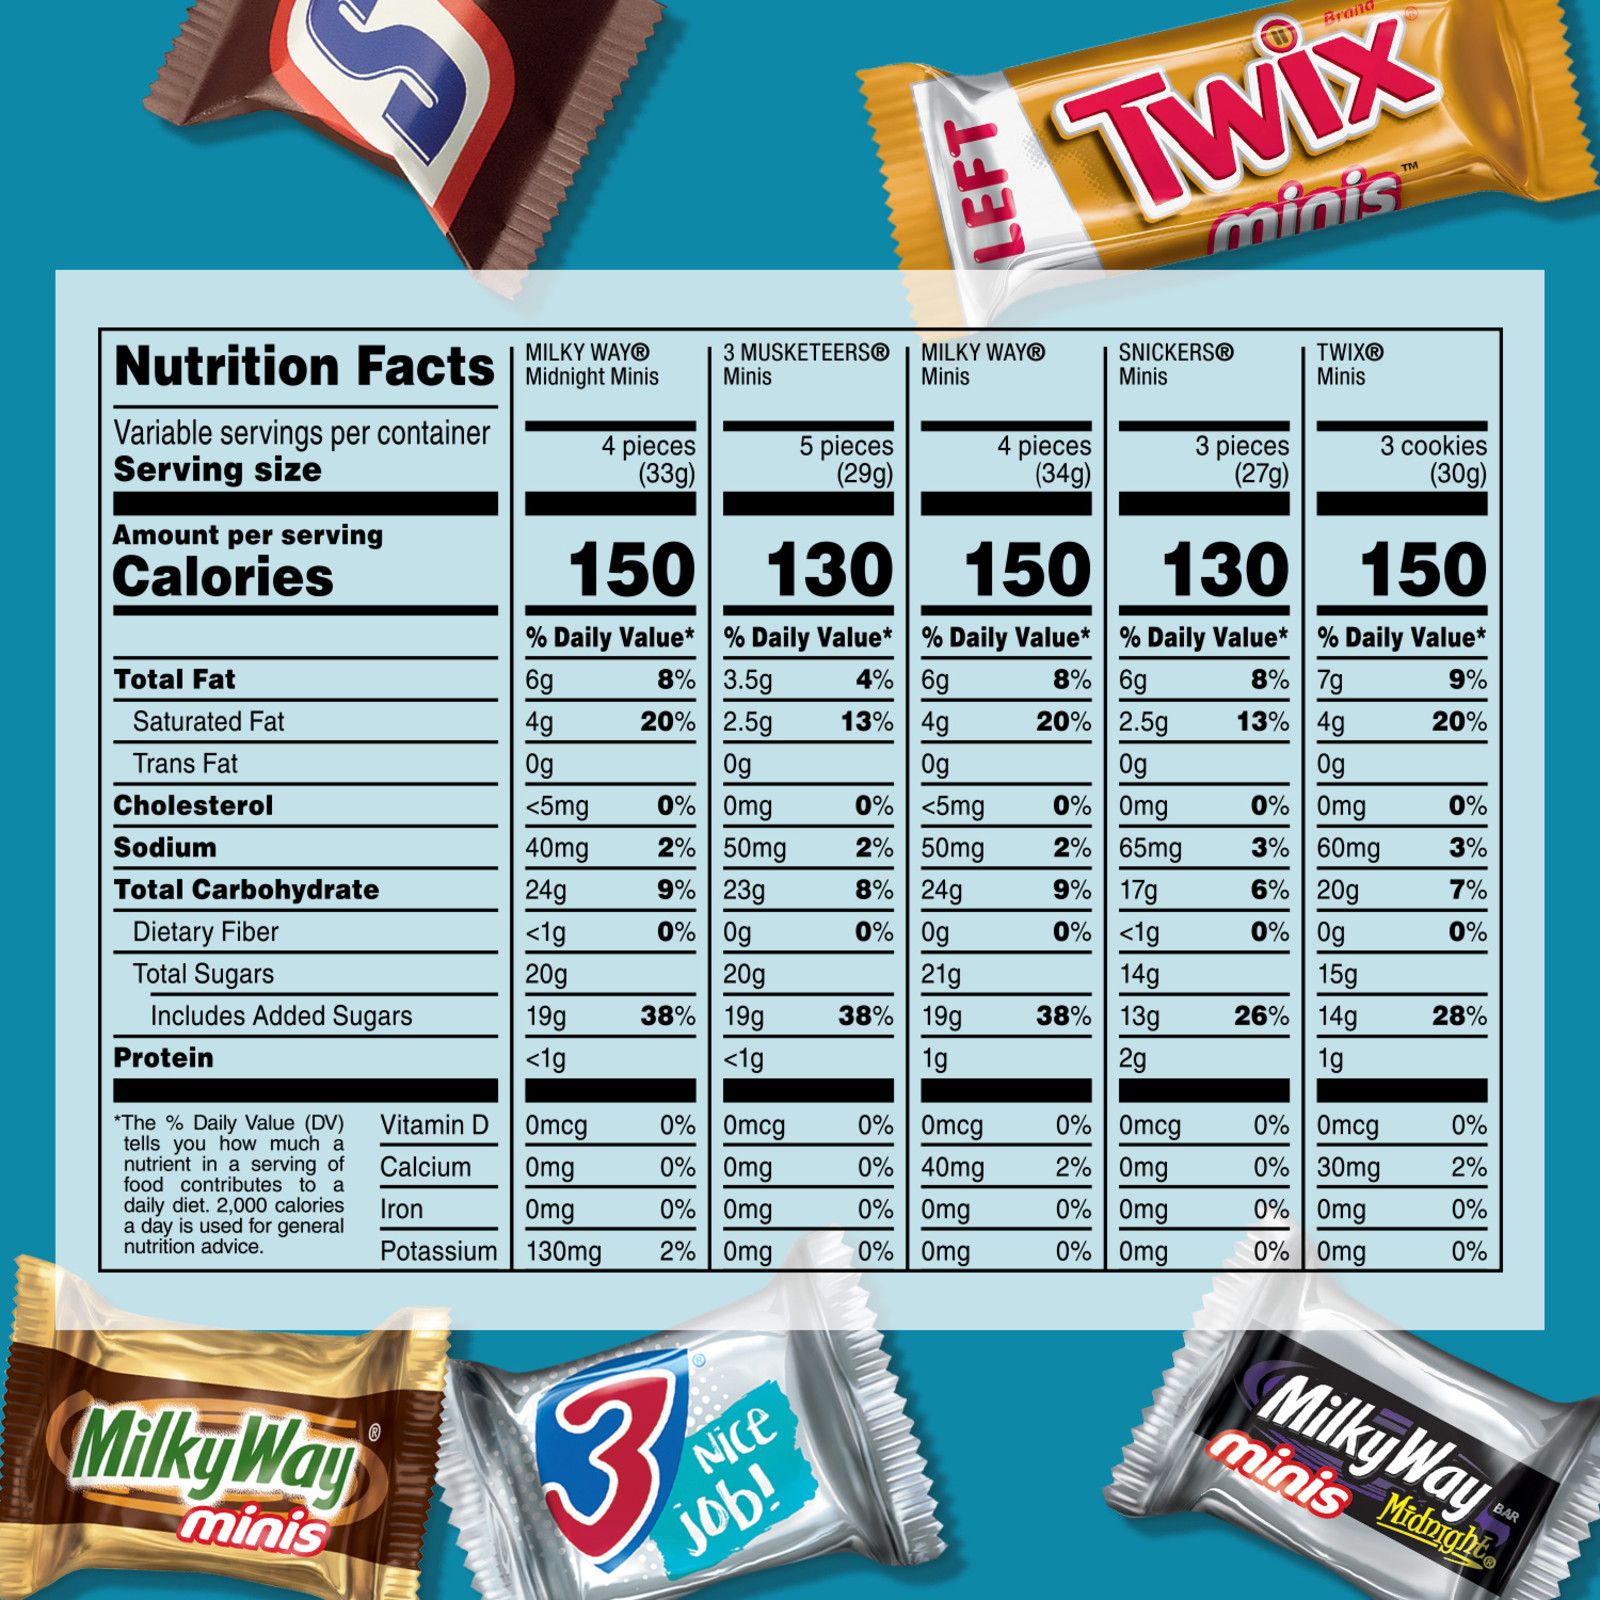 M&M'S, Twix, Snickers & More Bulk Chocolate Candy - 145ct Variety